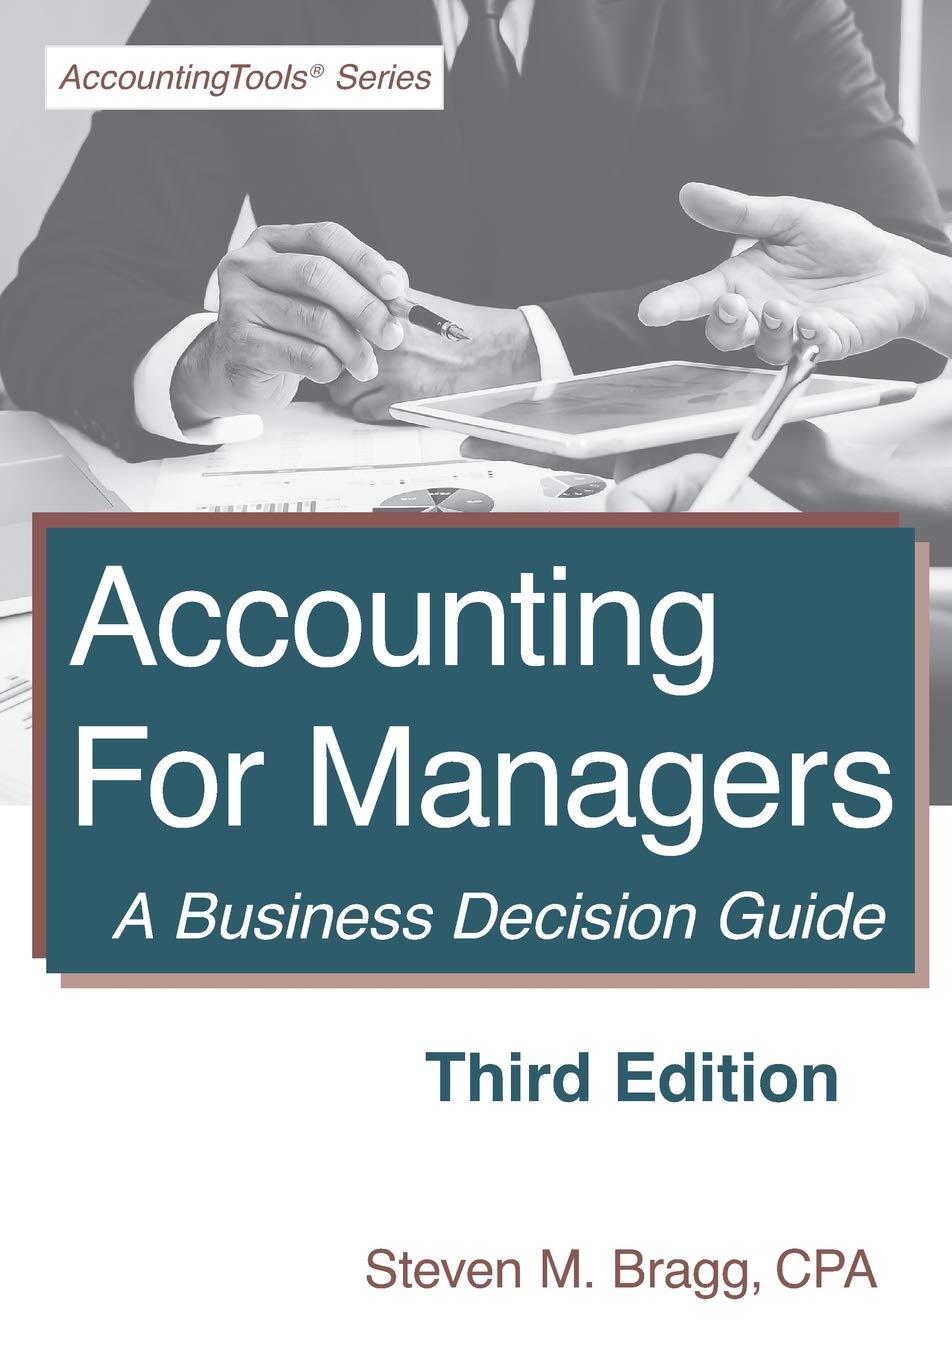 accounting for managers a business decision guide 3rd edition steven m. bragg 1642210226, 978-1642210224